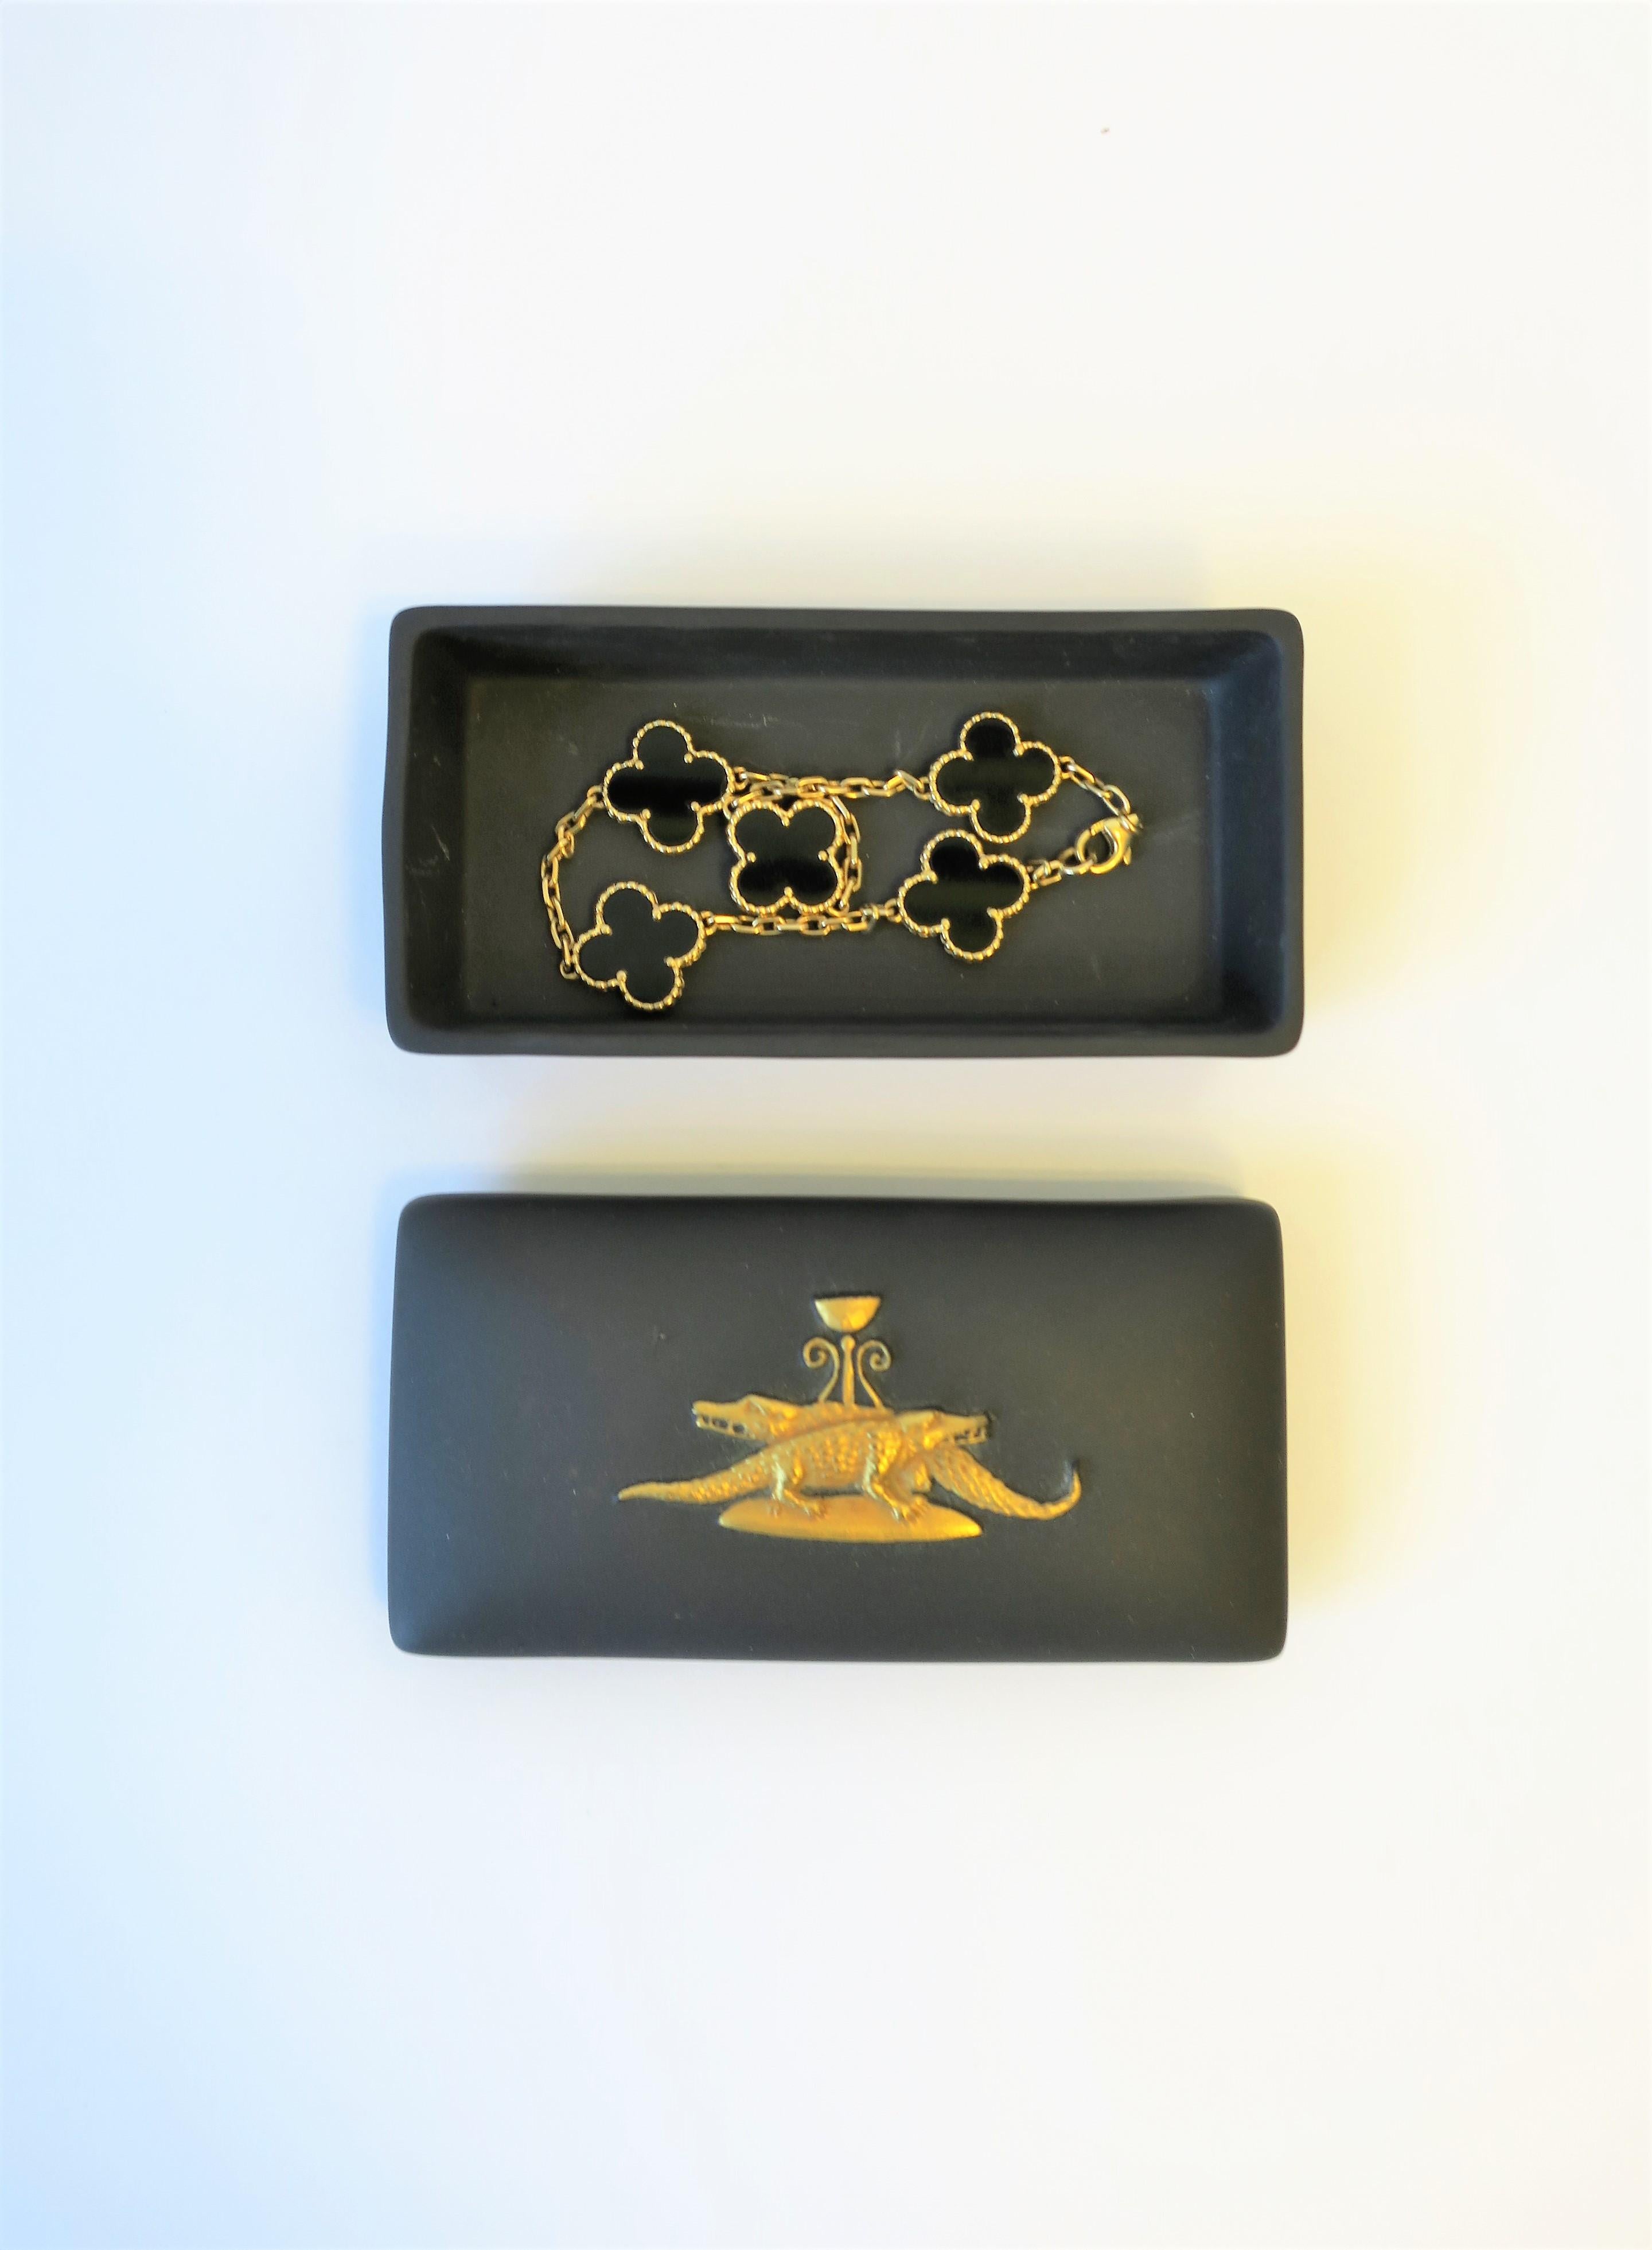 Neoclassical Revival English Wedgwood Matte Black Basalt and Gold Raised Relief Box